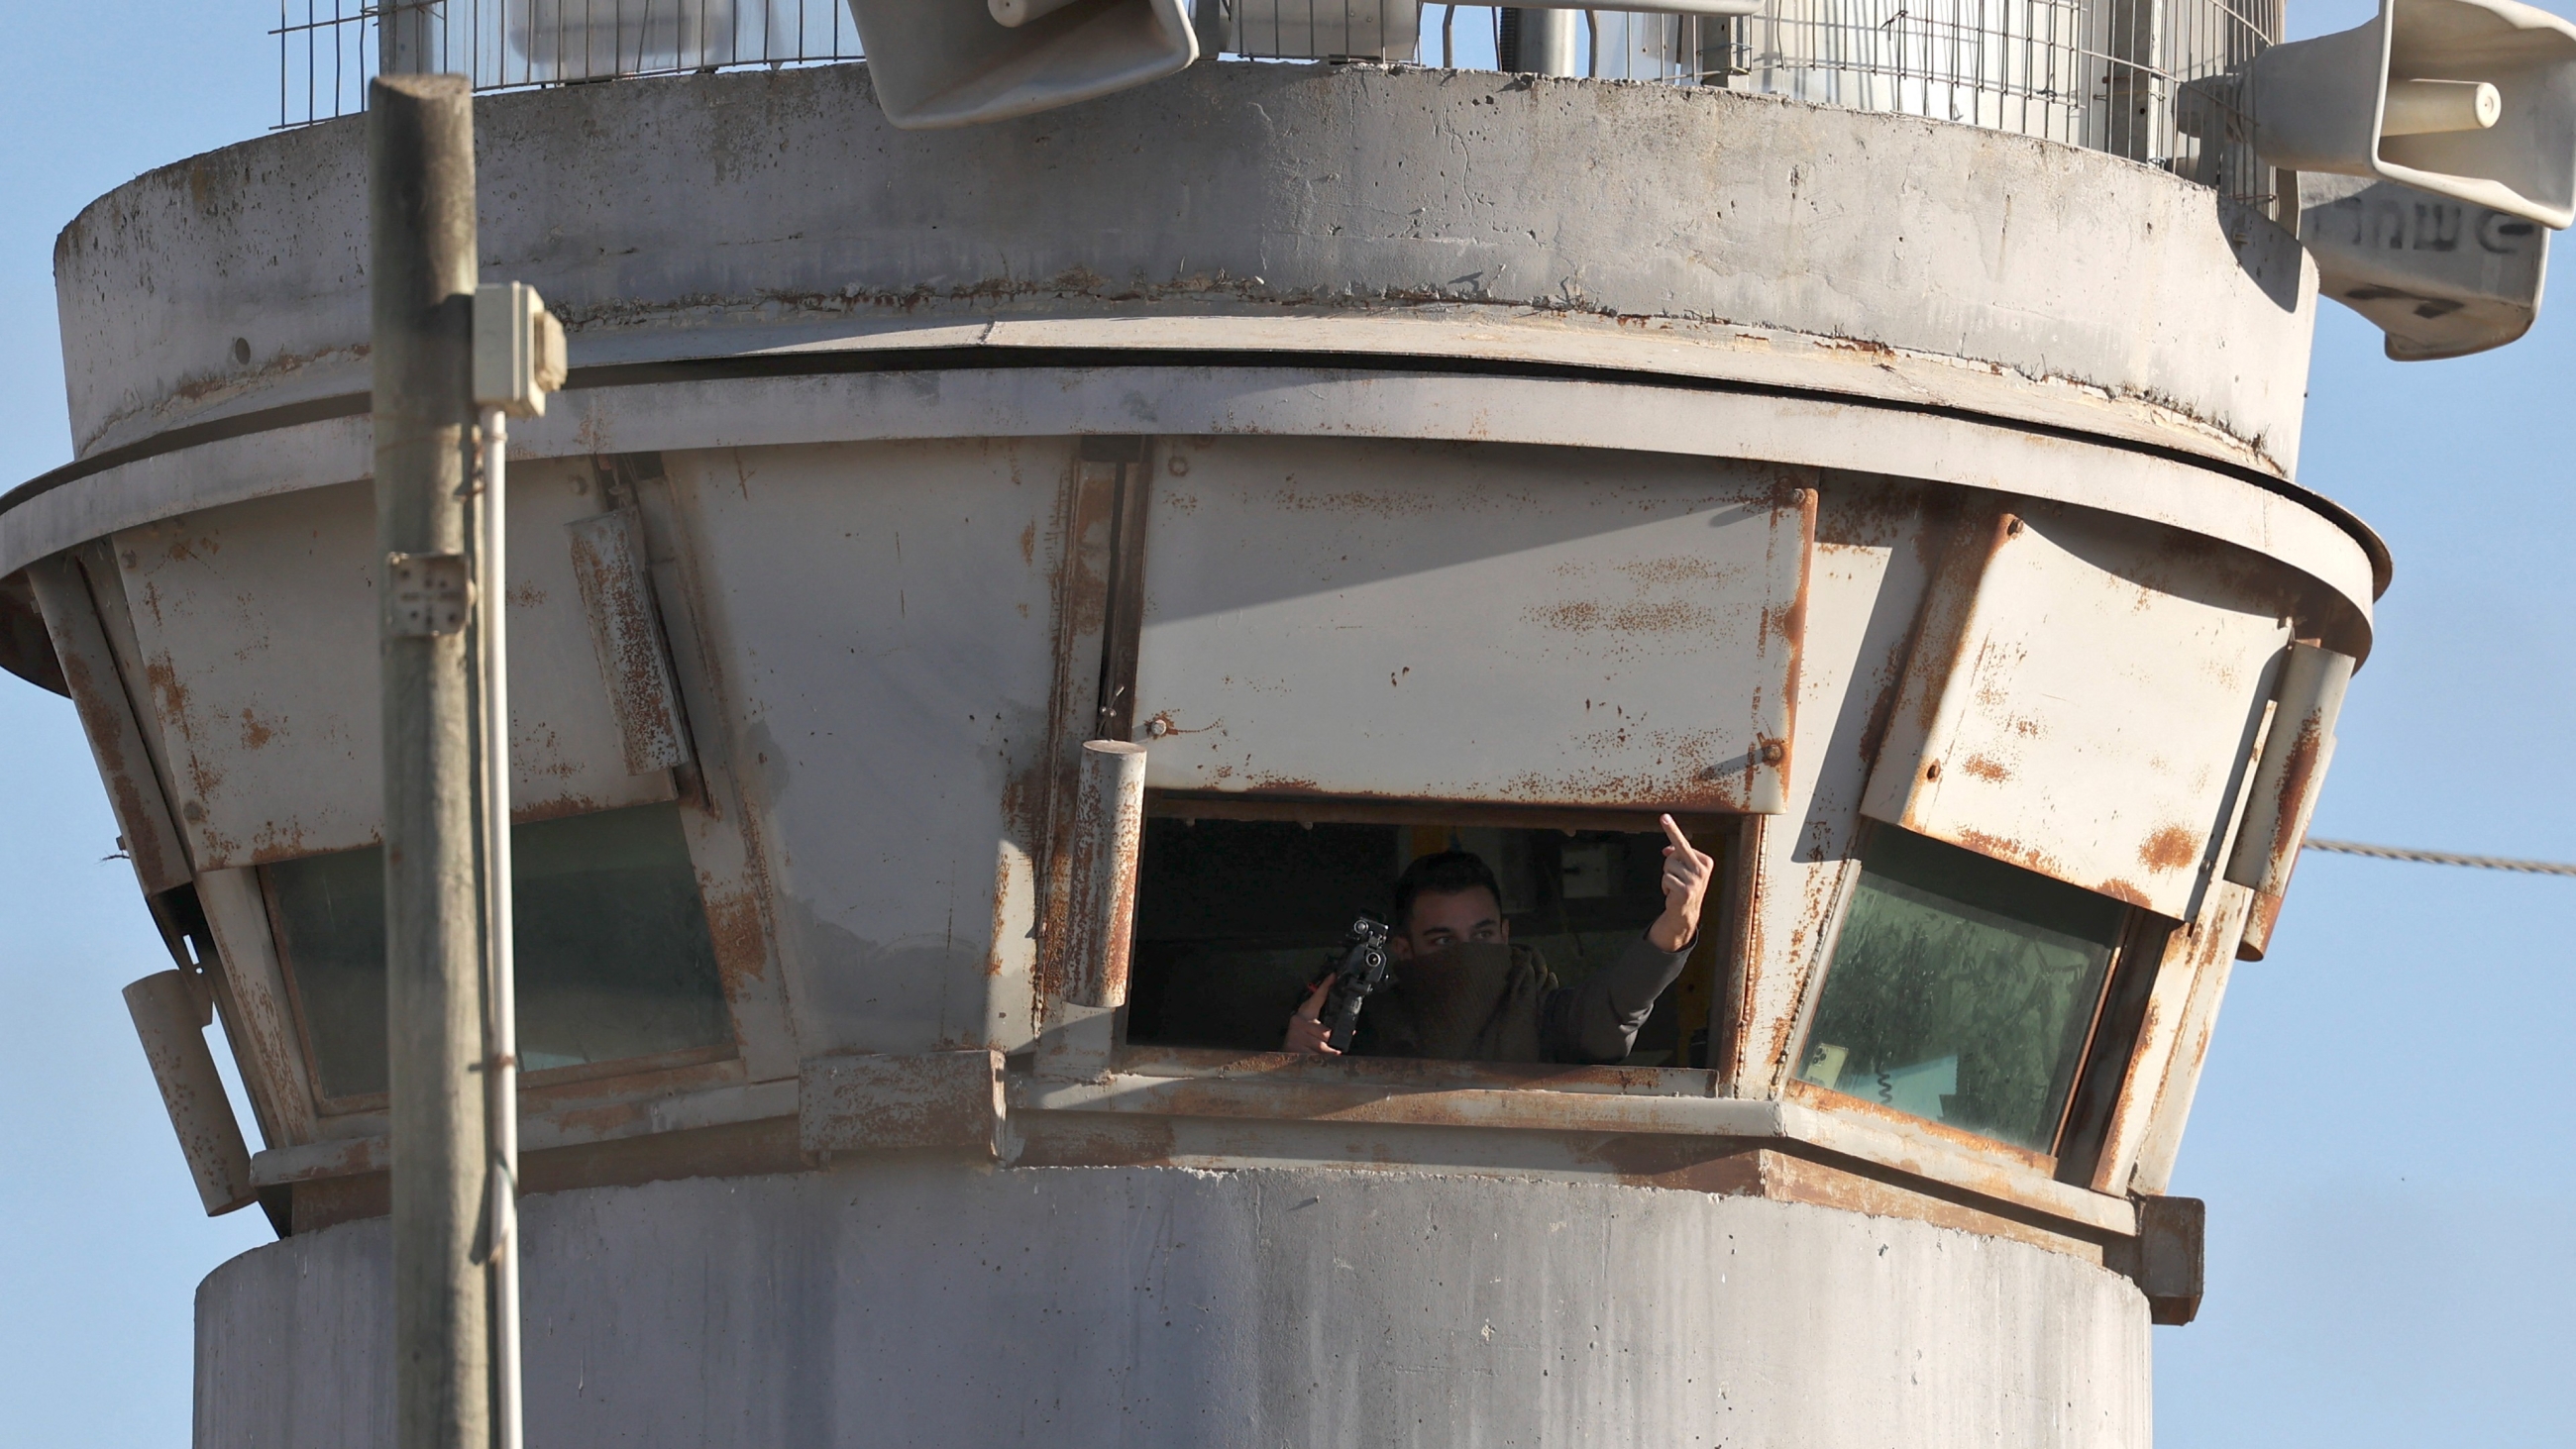 An Israeli soldier gestures from inside a watch tower at Israel's Ofer prison near the city of Ramallah in the occupied West Bank, on 12 July 2021 (AFP) 